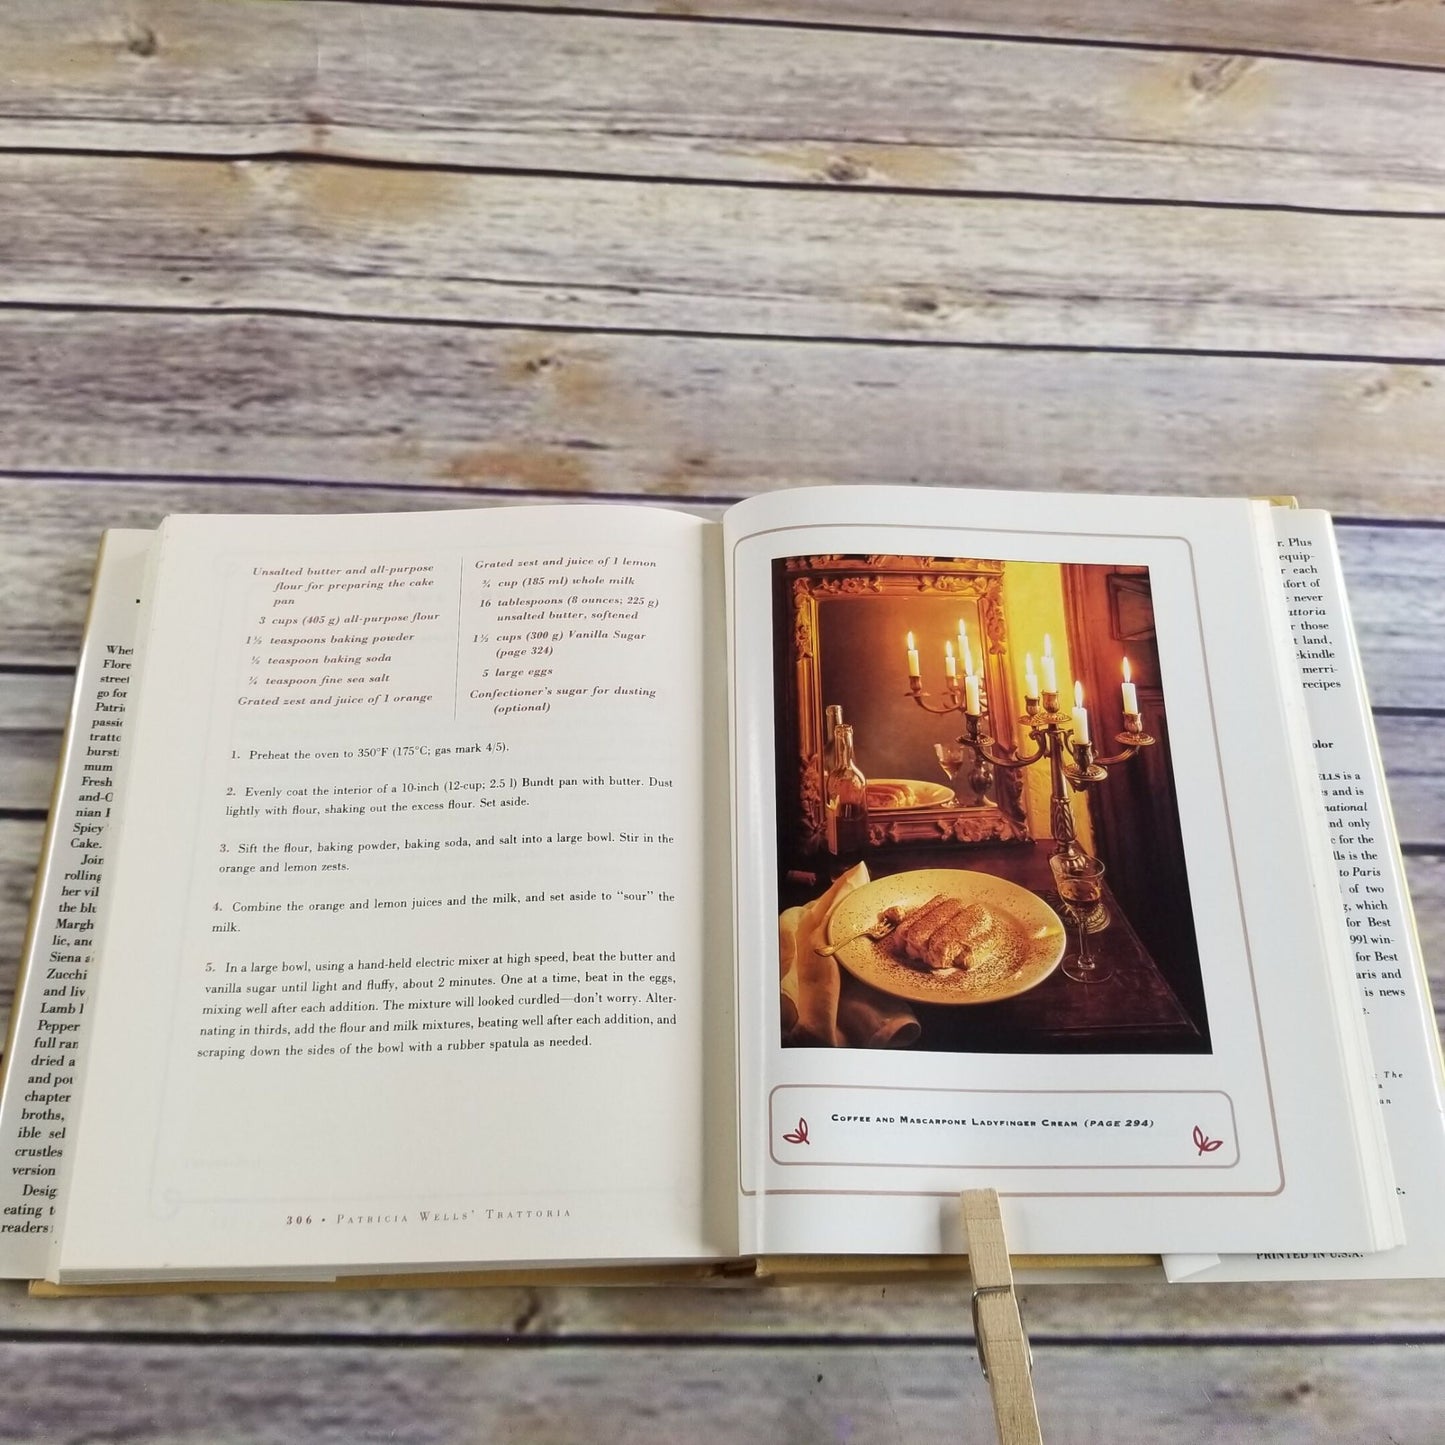 Vintage Italian Cookbook Trattoria Healthy Simple Robust Recipes Patricia Wells 1993 Hardcover With Dust Jacket